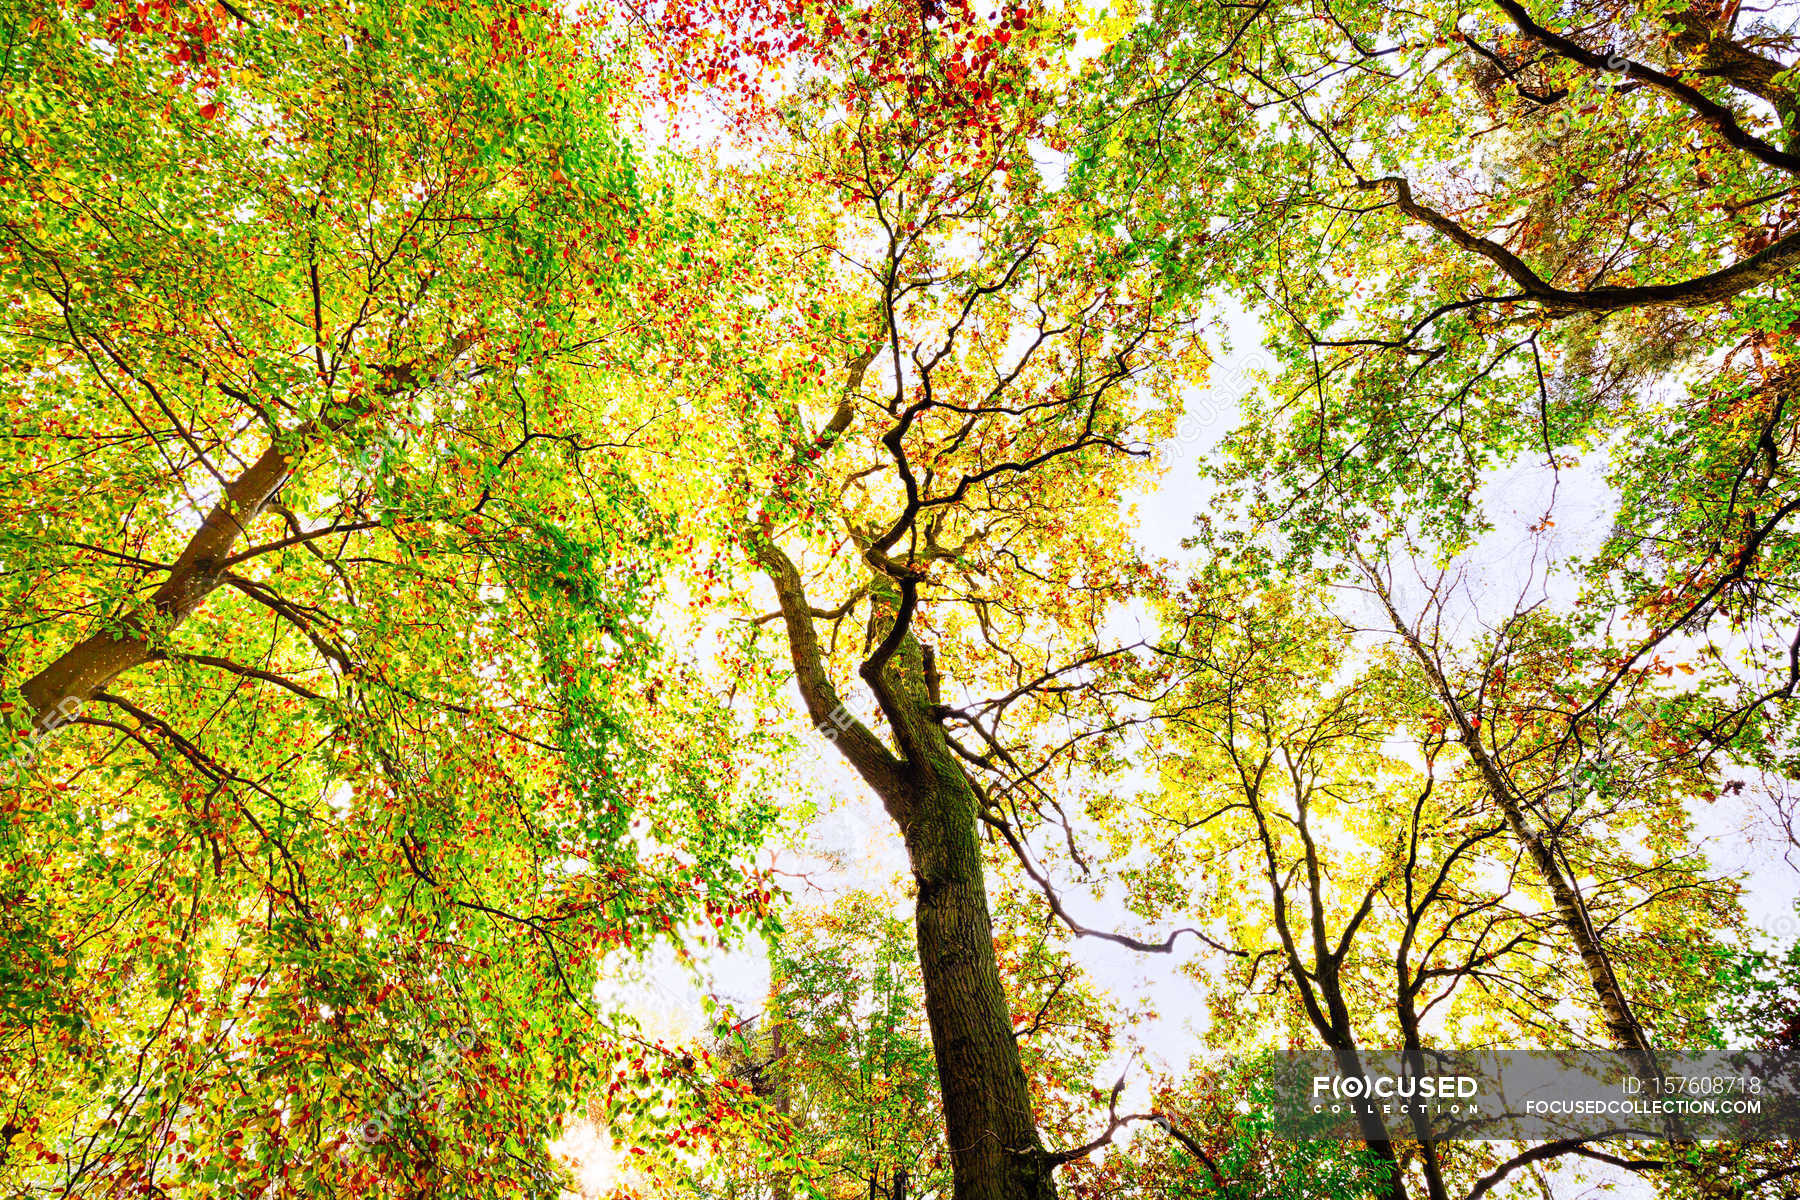 Wild forest at fall — Stock Photo | #157608718